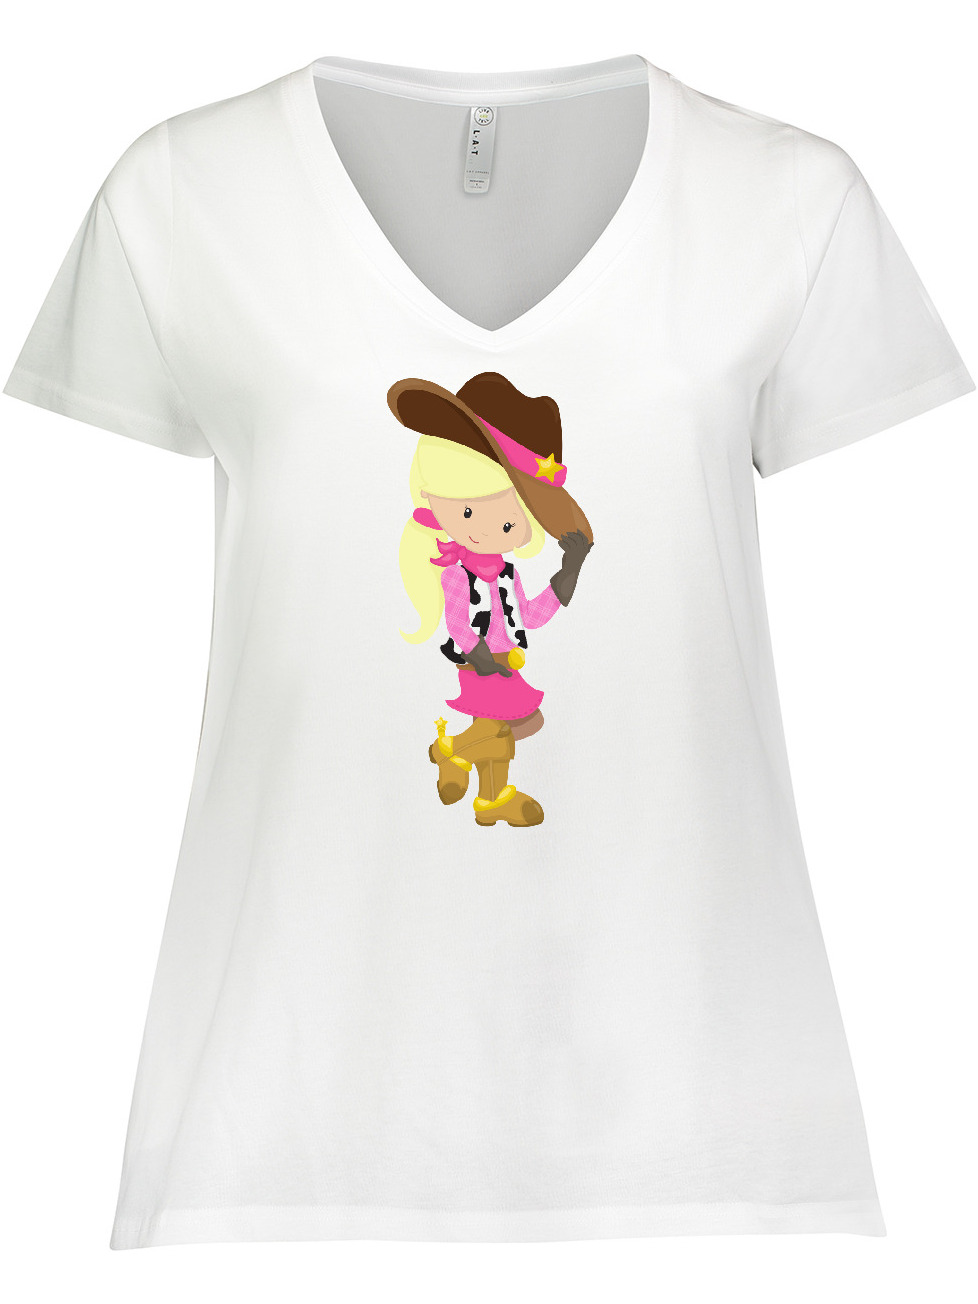 Inktastic Cowboy Girl, Girl With Cowboy Hat, Blonde Hair Women's Plus Size V-Neck T-Shirt - image 1 of 4